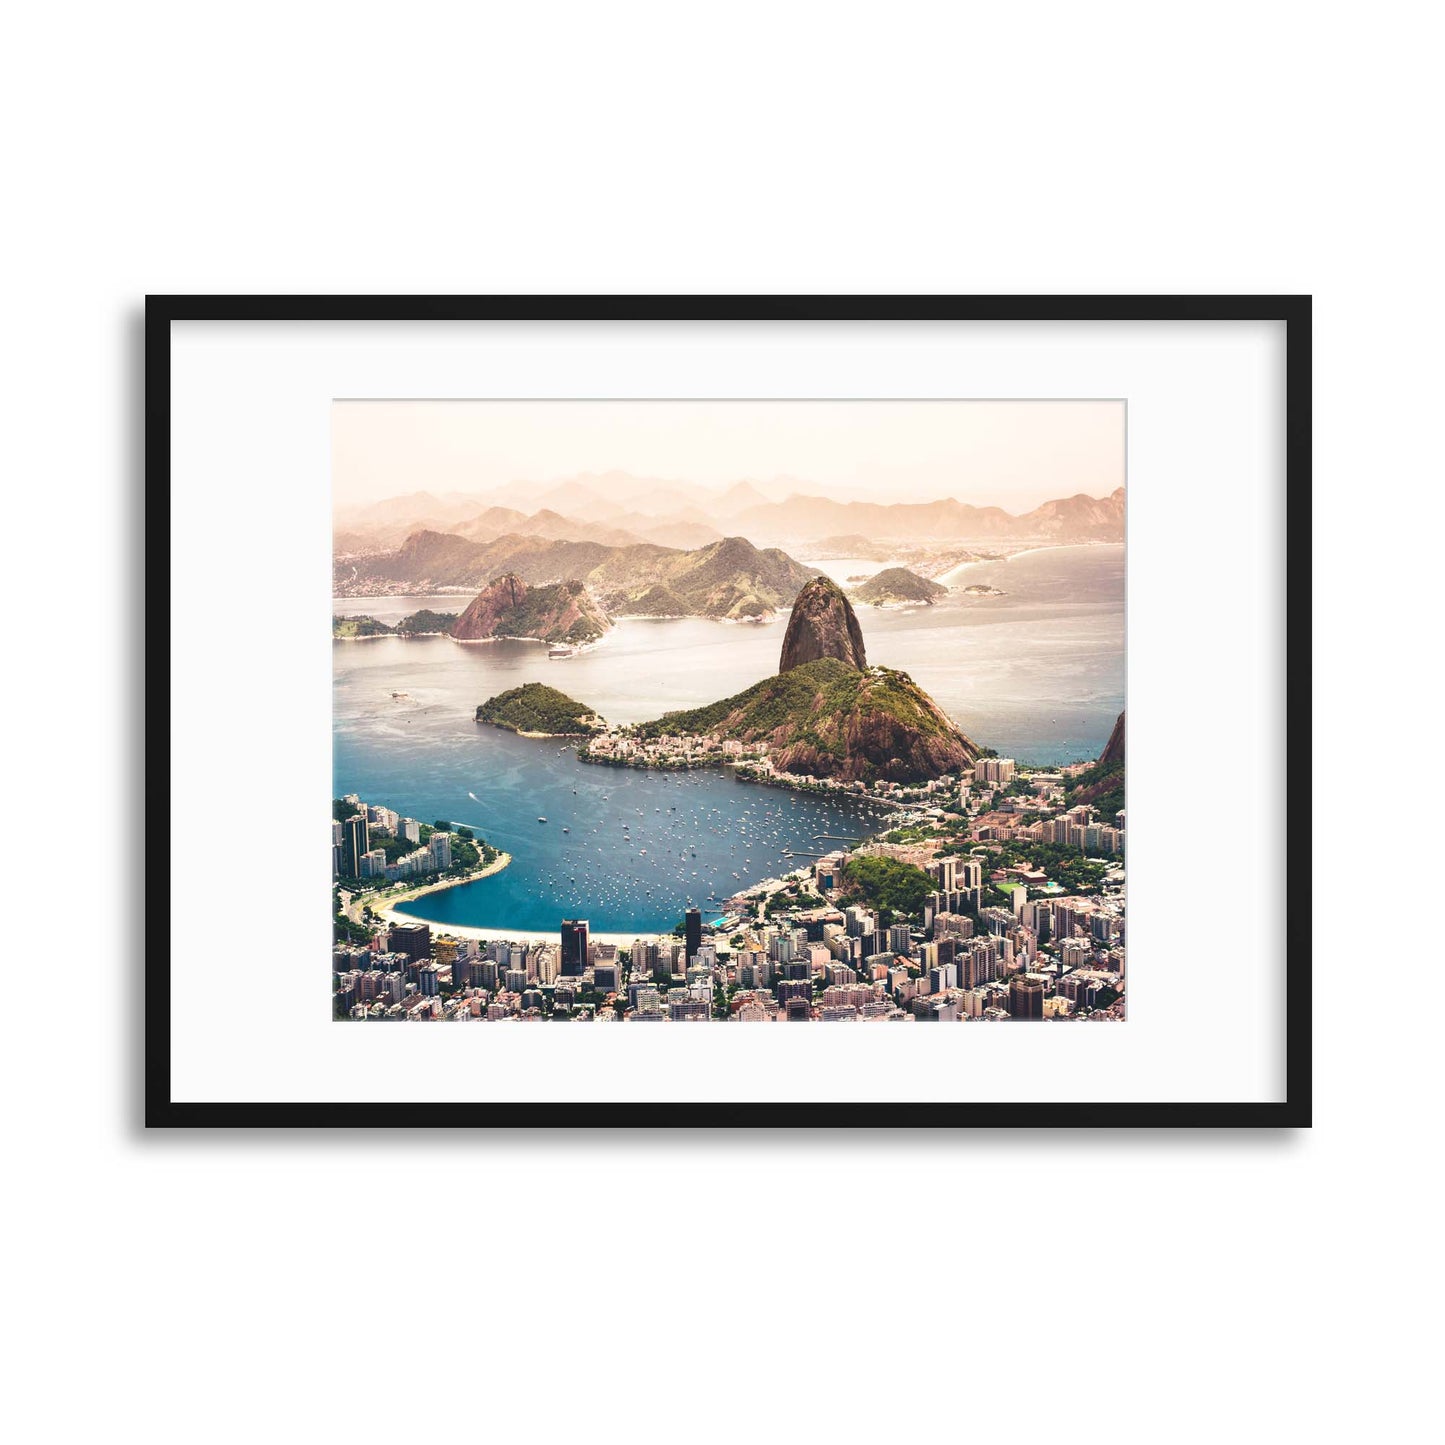 Sugarloaf Mountain in the Distance, Rio de Janiero Framed Print - USTAD HOME